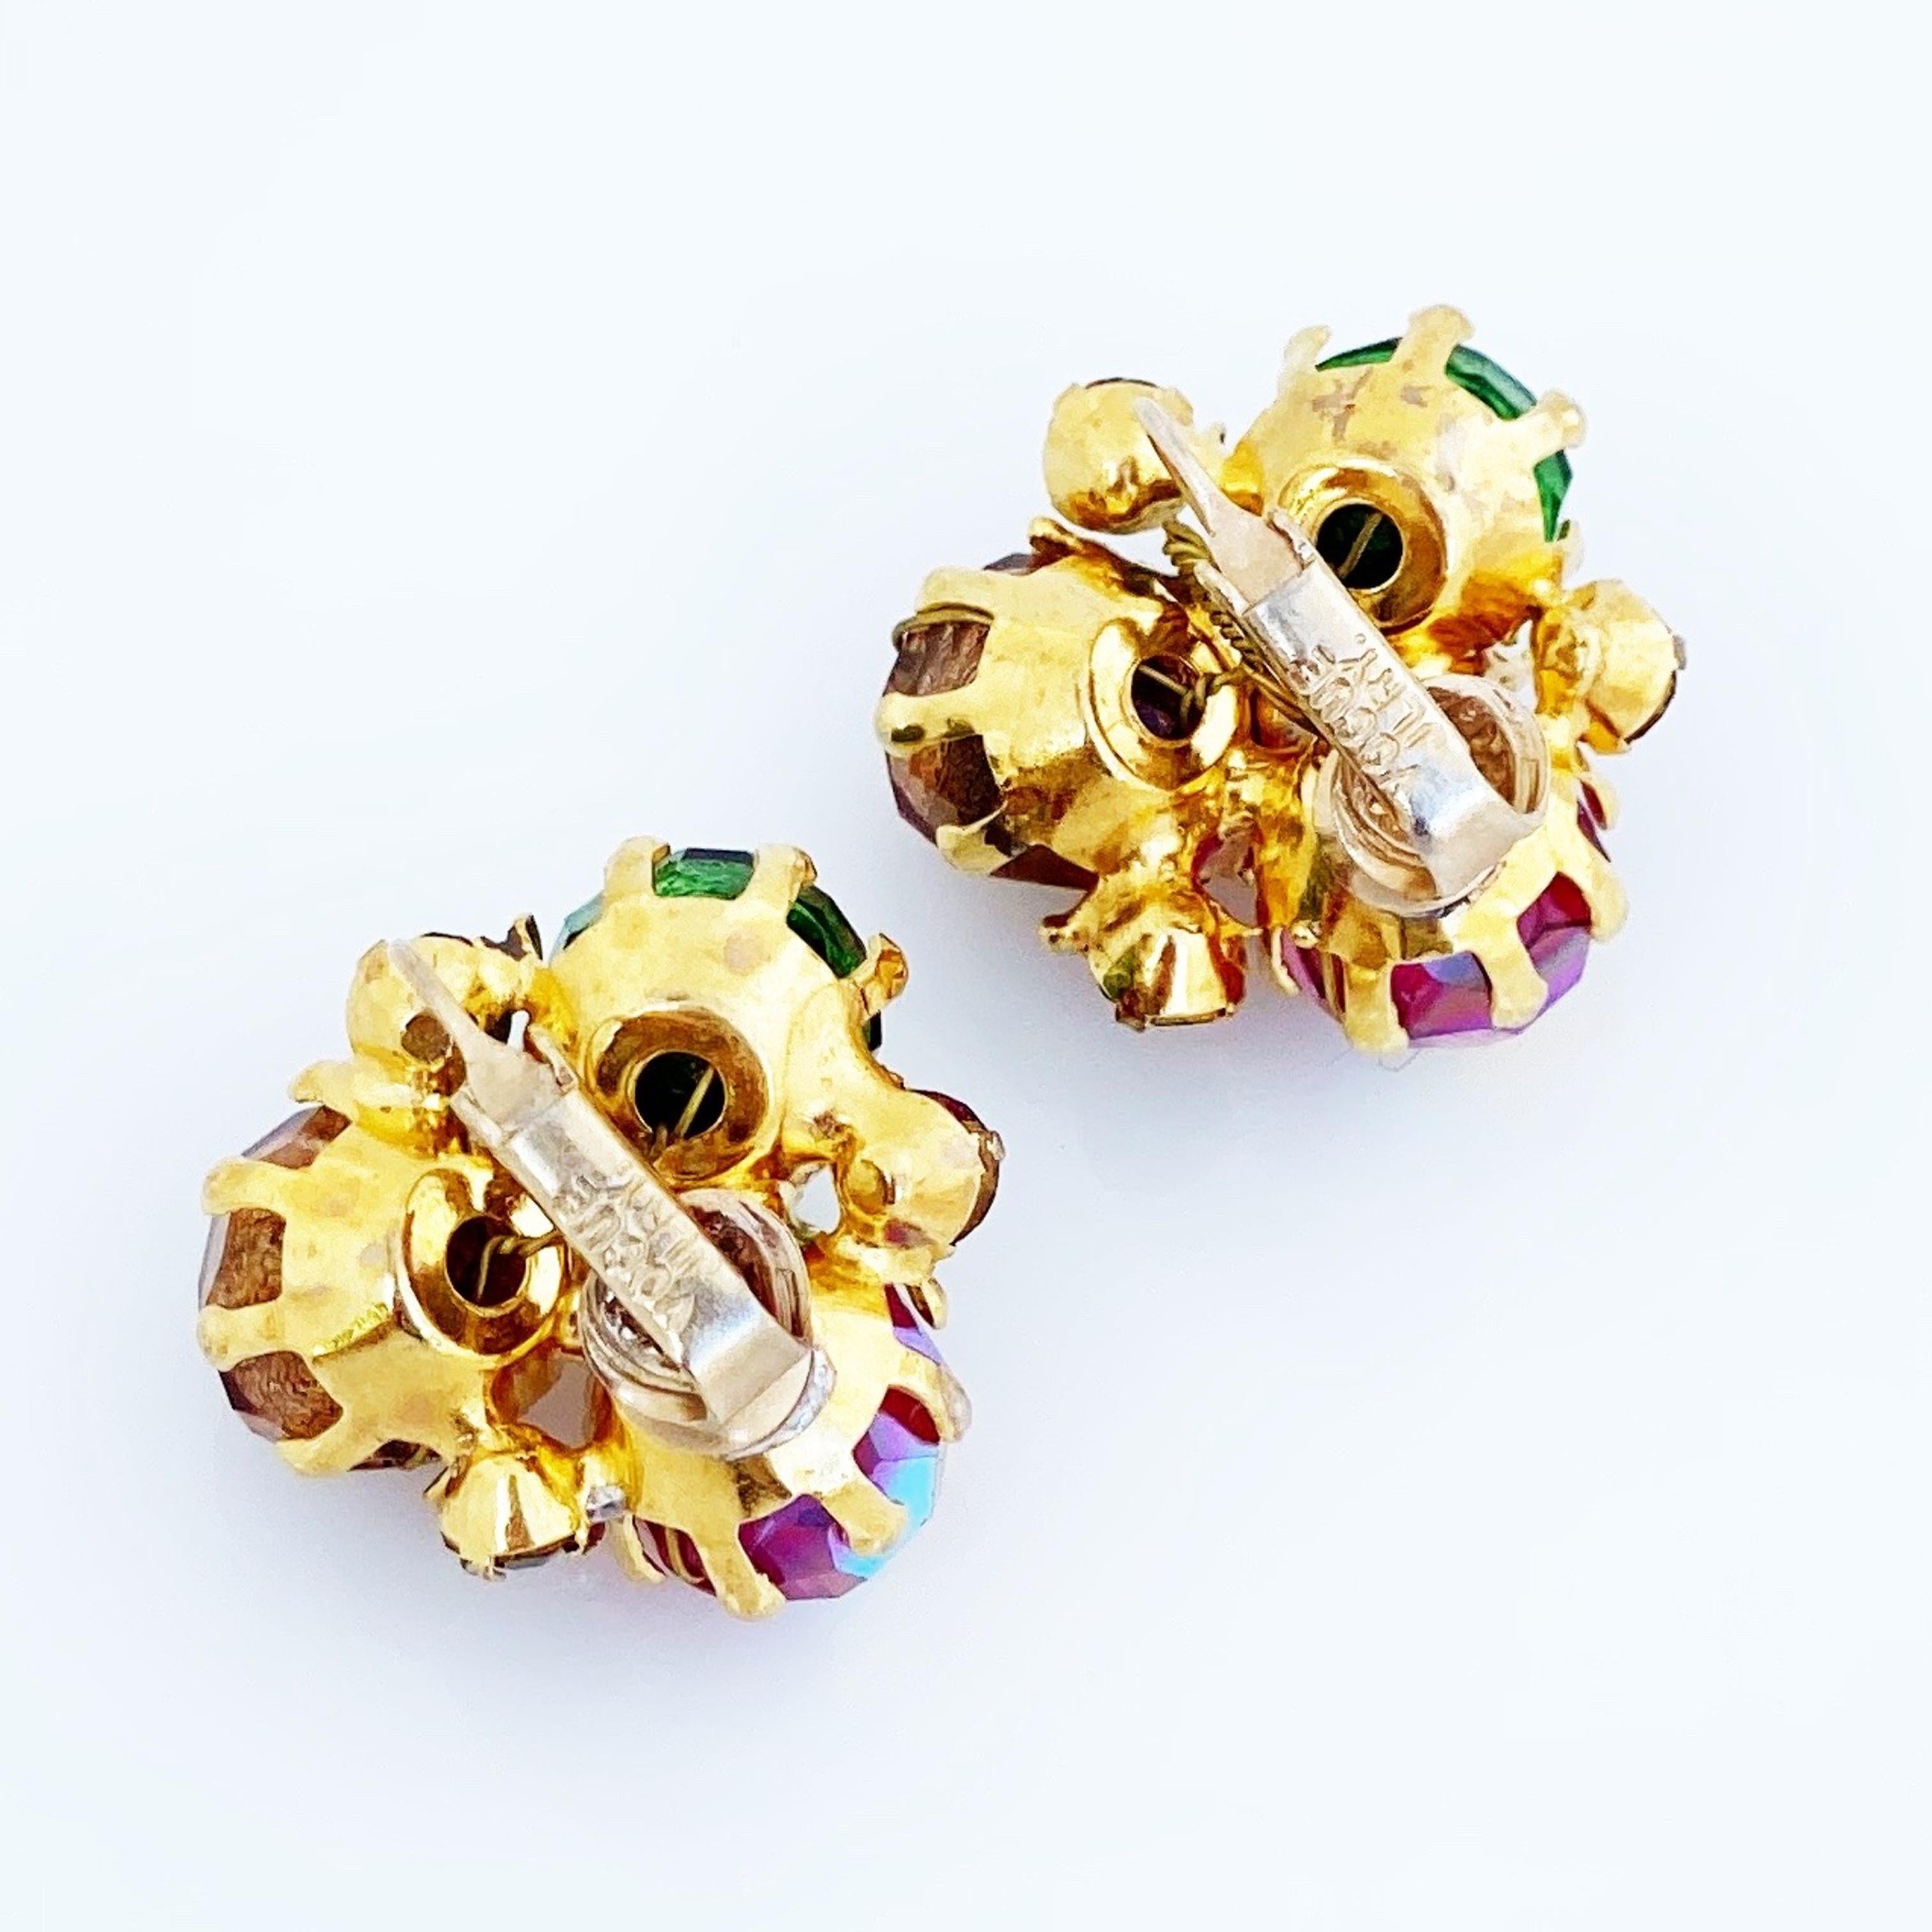 Colorful Bead & Rhinestone Cluster Earrings By Vogue, 1950s 1